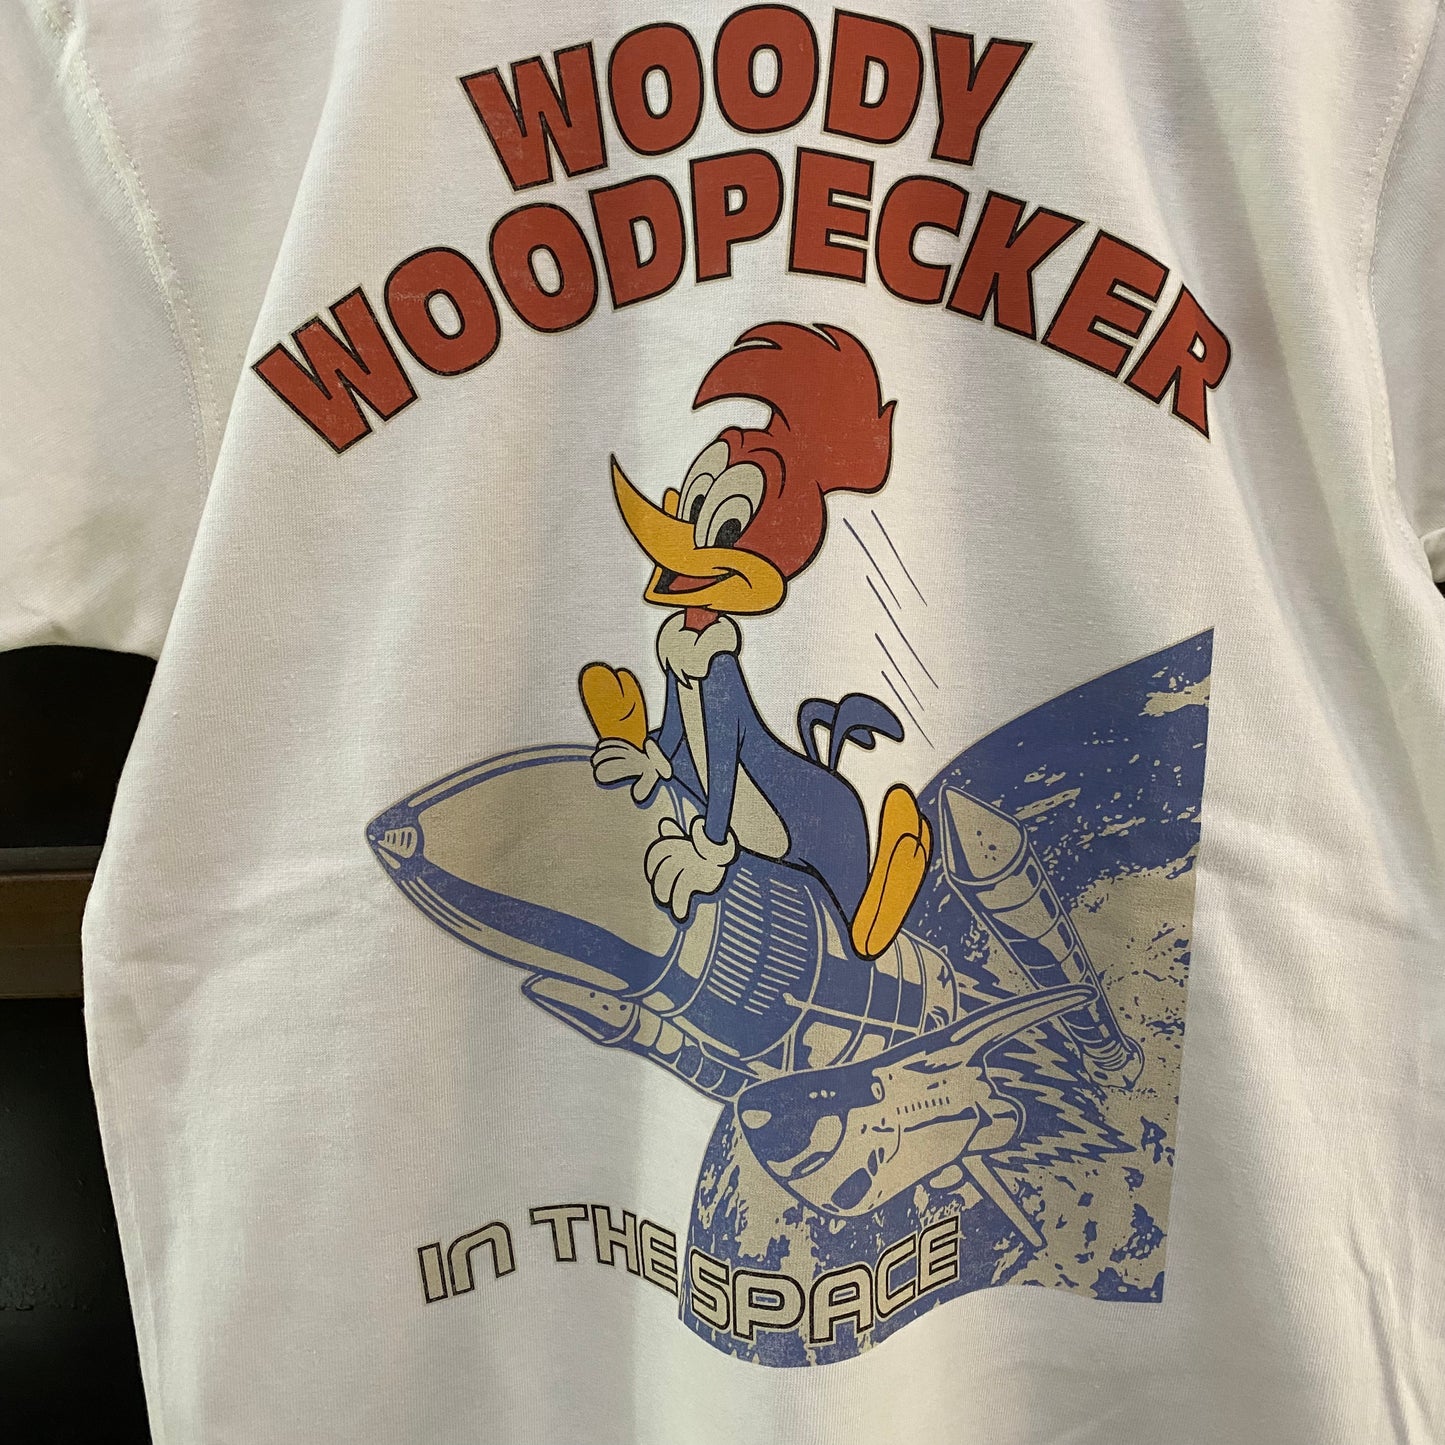 TOY'S McCOY/トイズマッコイ  WOODY WOODPECKER TEE "WOODY WOODPECKER IN THE SPACE" /TMC2408